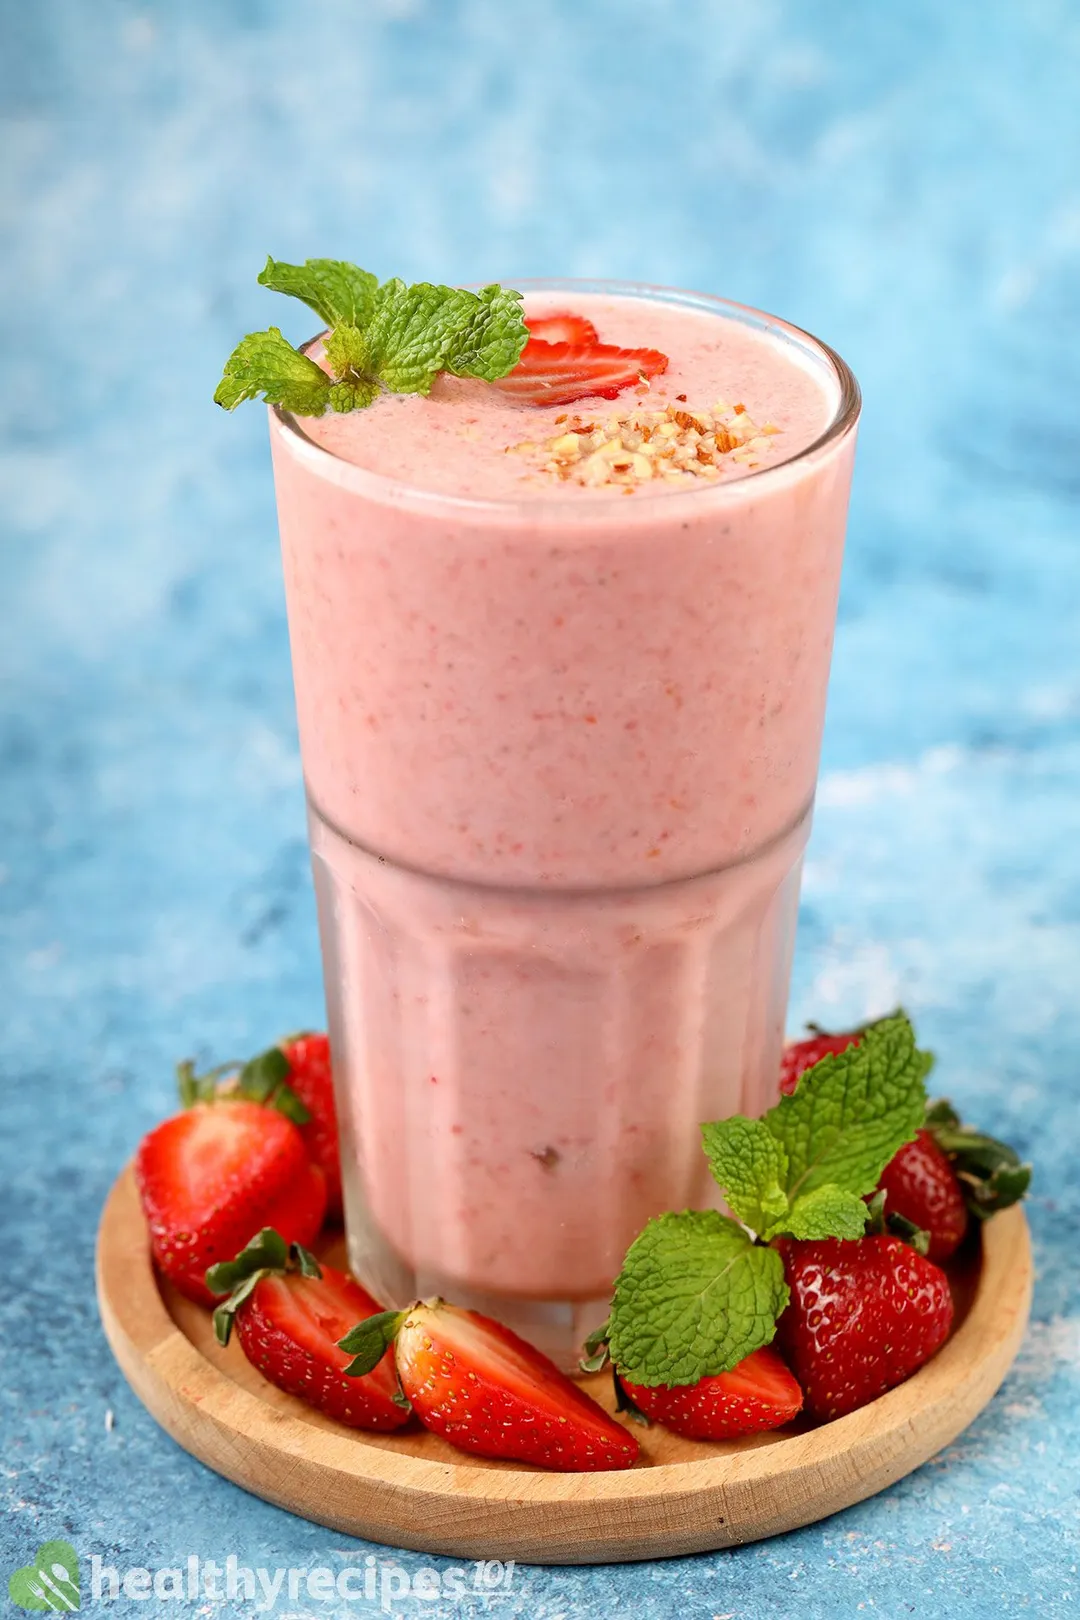 A glass of strawberry smoothie laid on a wooden coaster and surrounded by sliced strawberries and mint leaves.